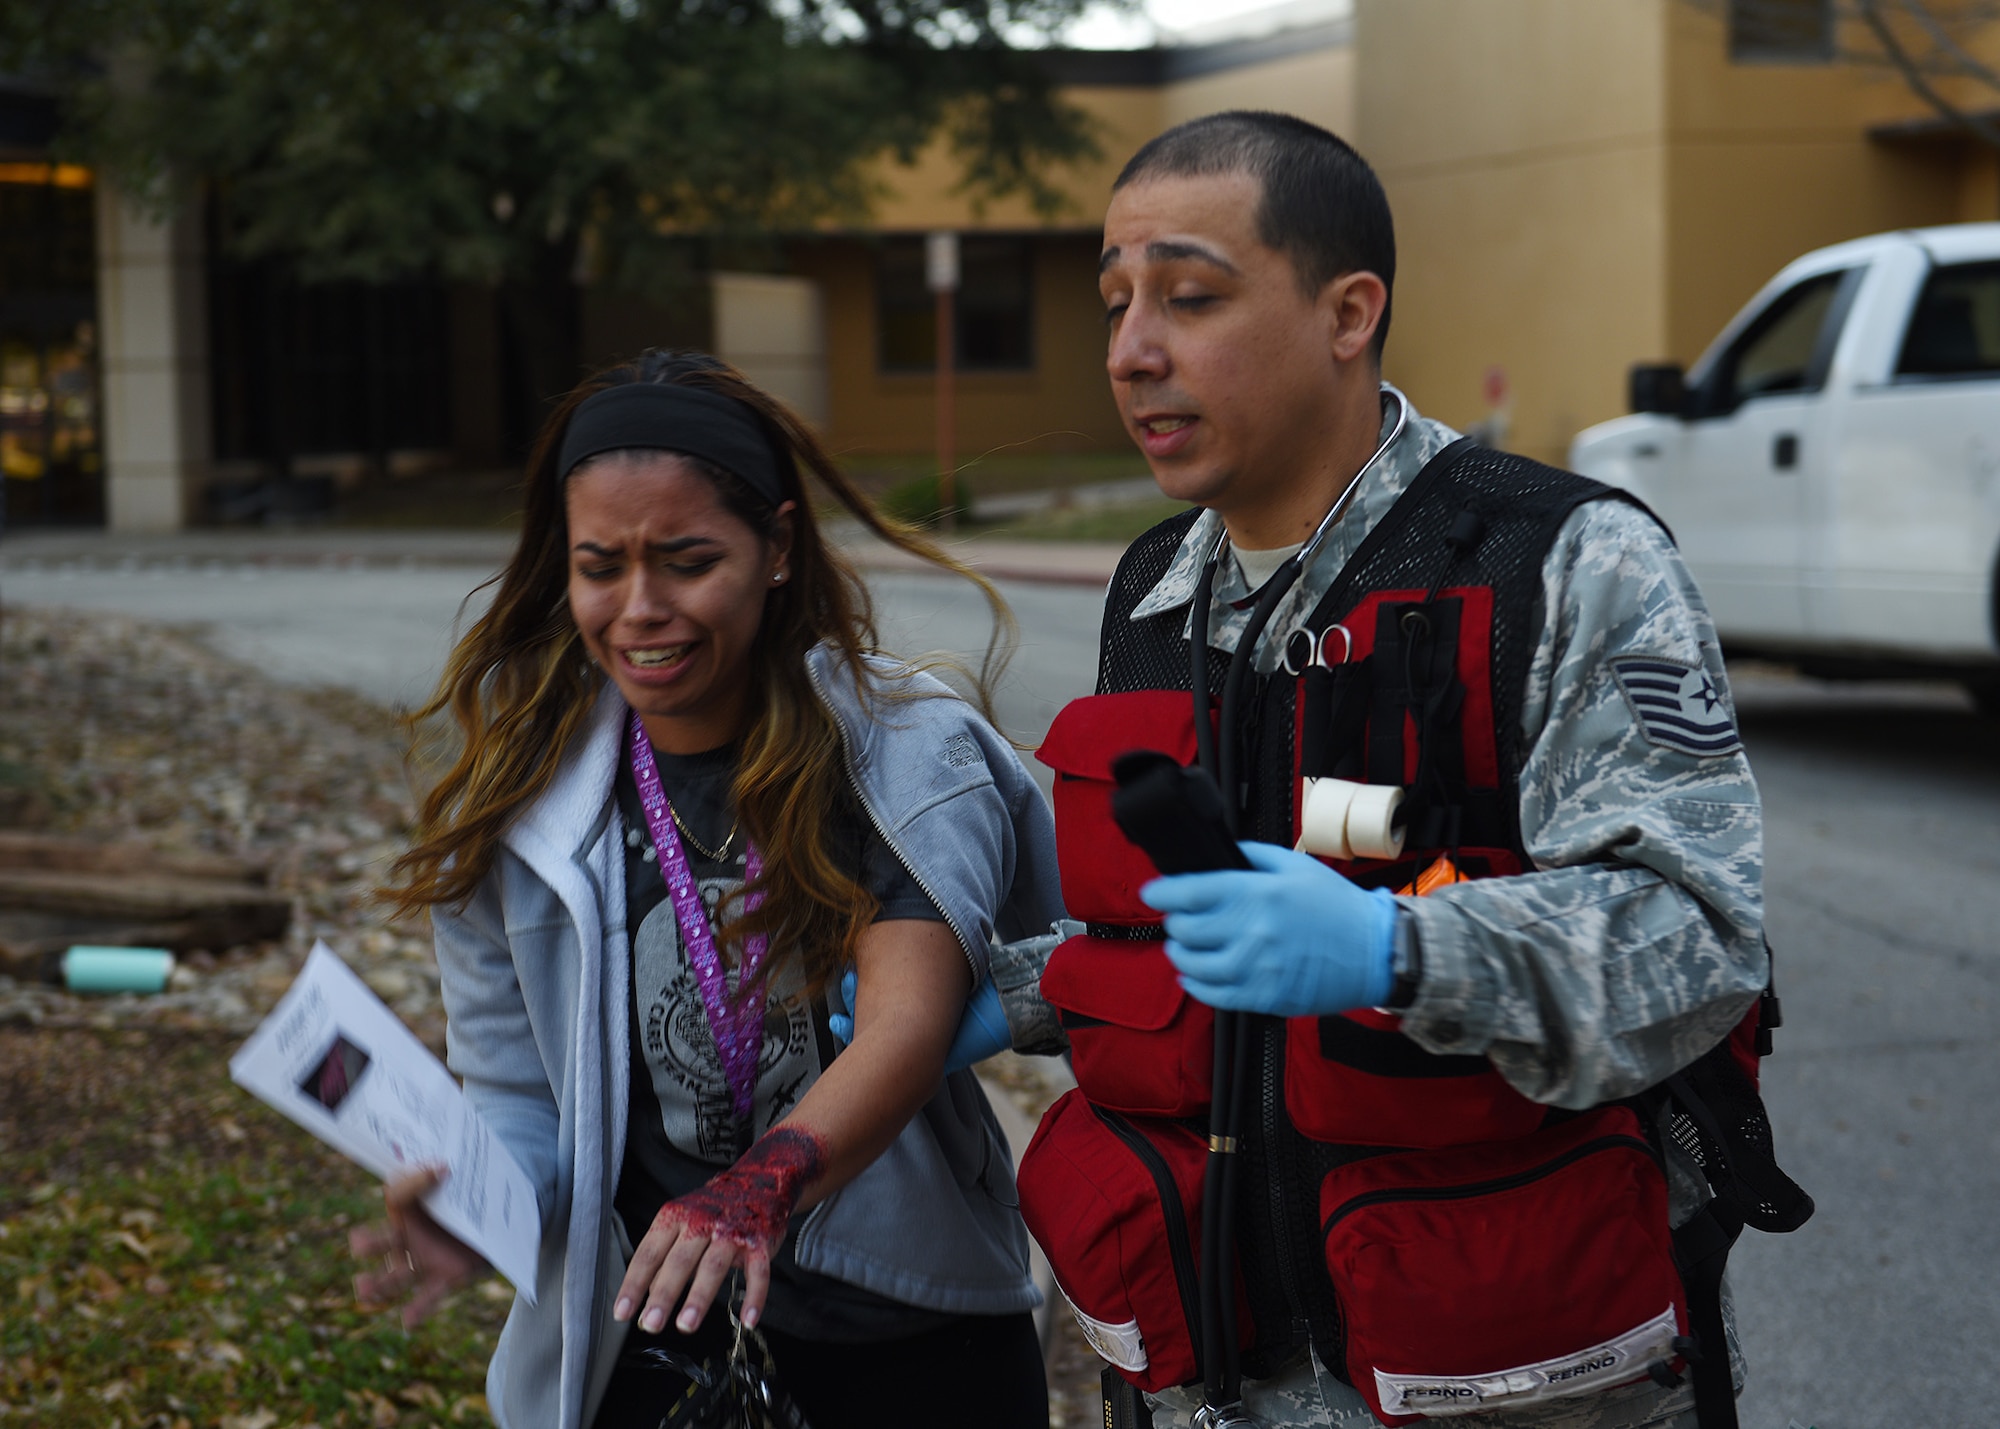 Tech. Sgt. Elliot Lucero, 7th Operational Medical Readiness Squadron noncommissioned officer in charge of the base operational medical cell, escorts Senior Airman Marisol White, 7th Maintenance Group maintenance management production journeyman and simulated injured patient, during the 7th Medical Group’s chemical, biological, radiological, and nuclear exercise at Dyess Air Force Base, Texas, March 6, 2020.